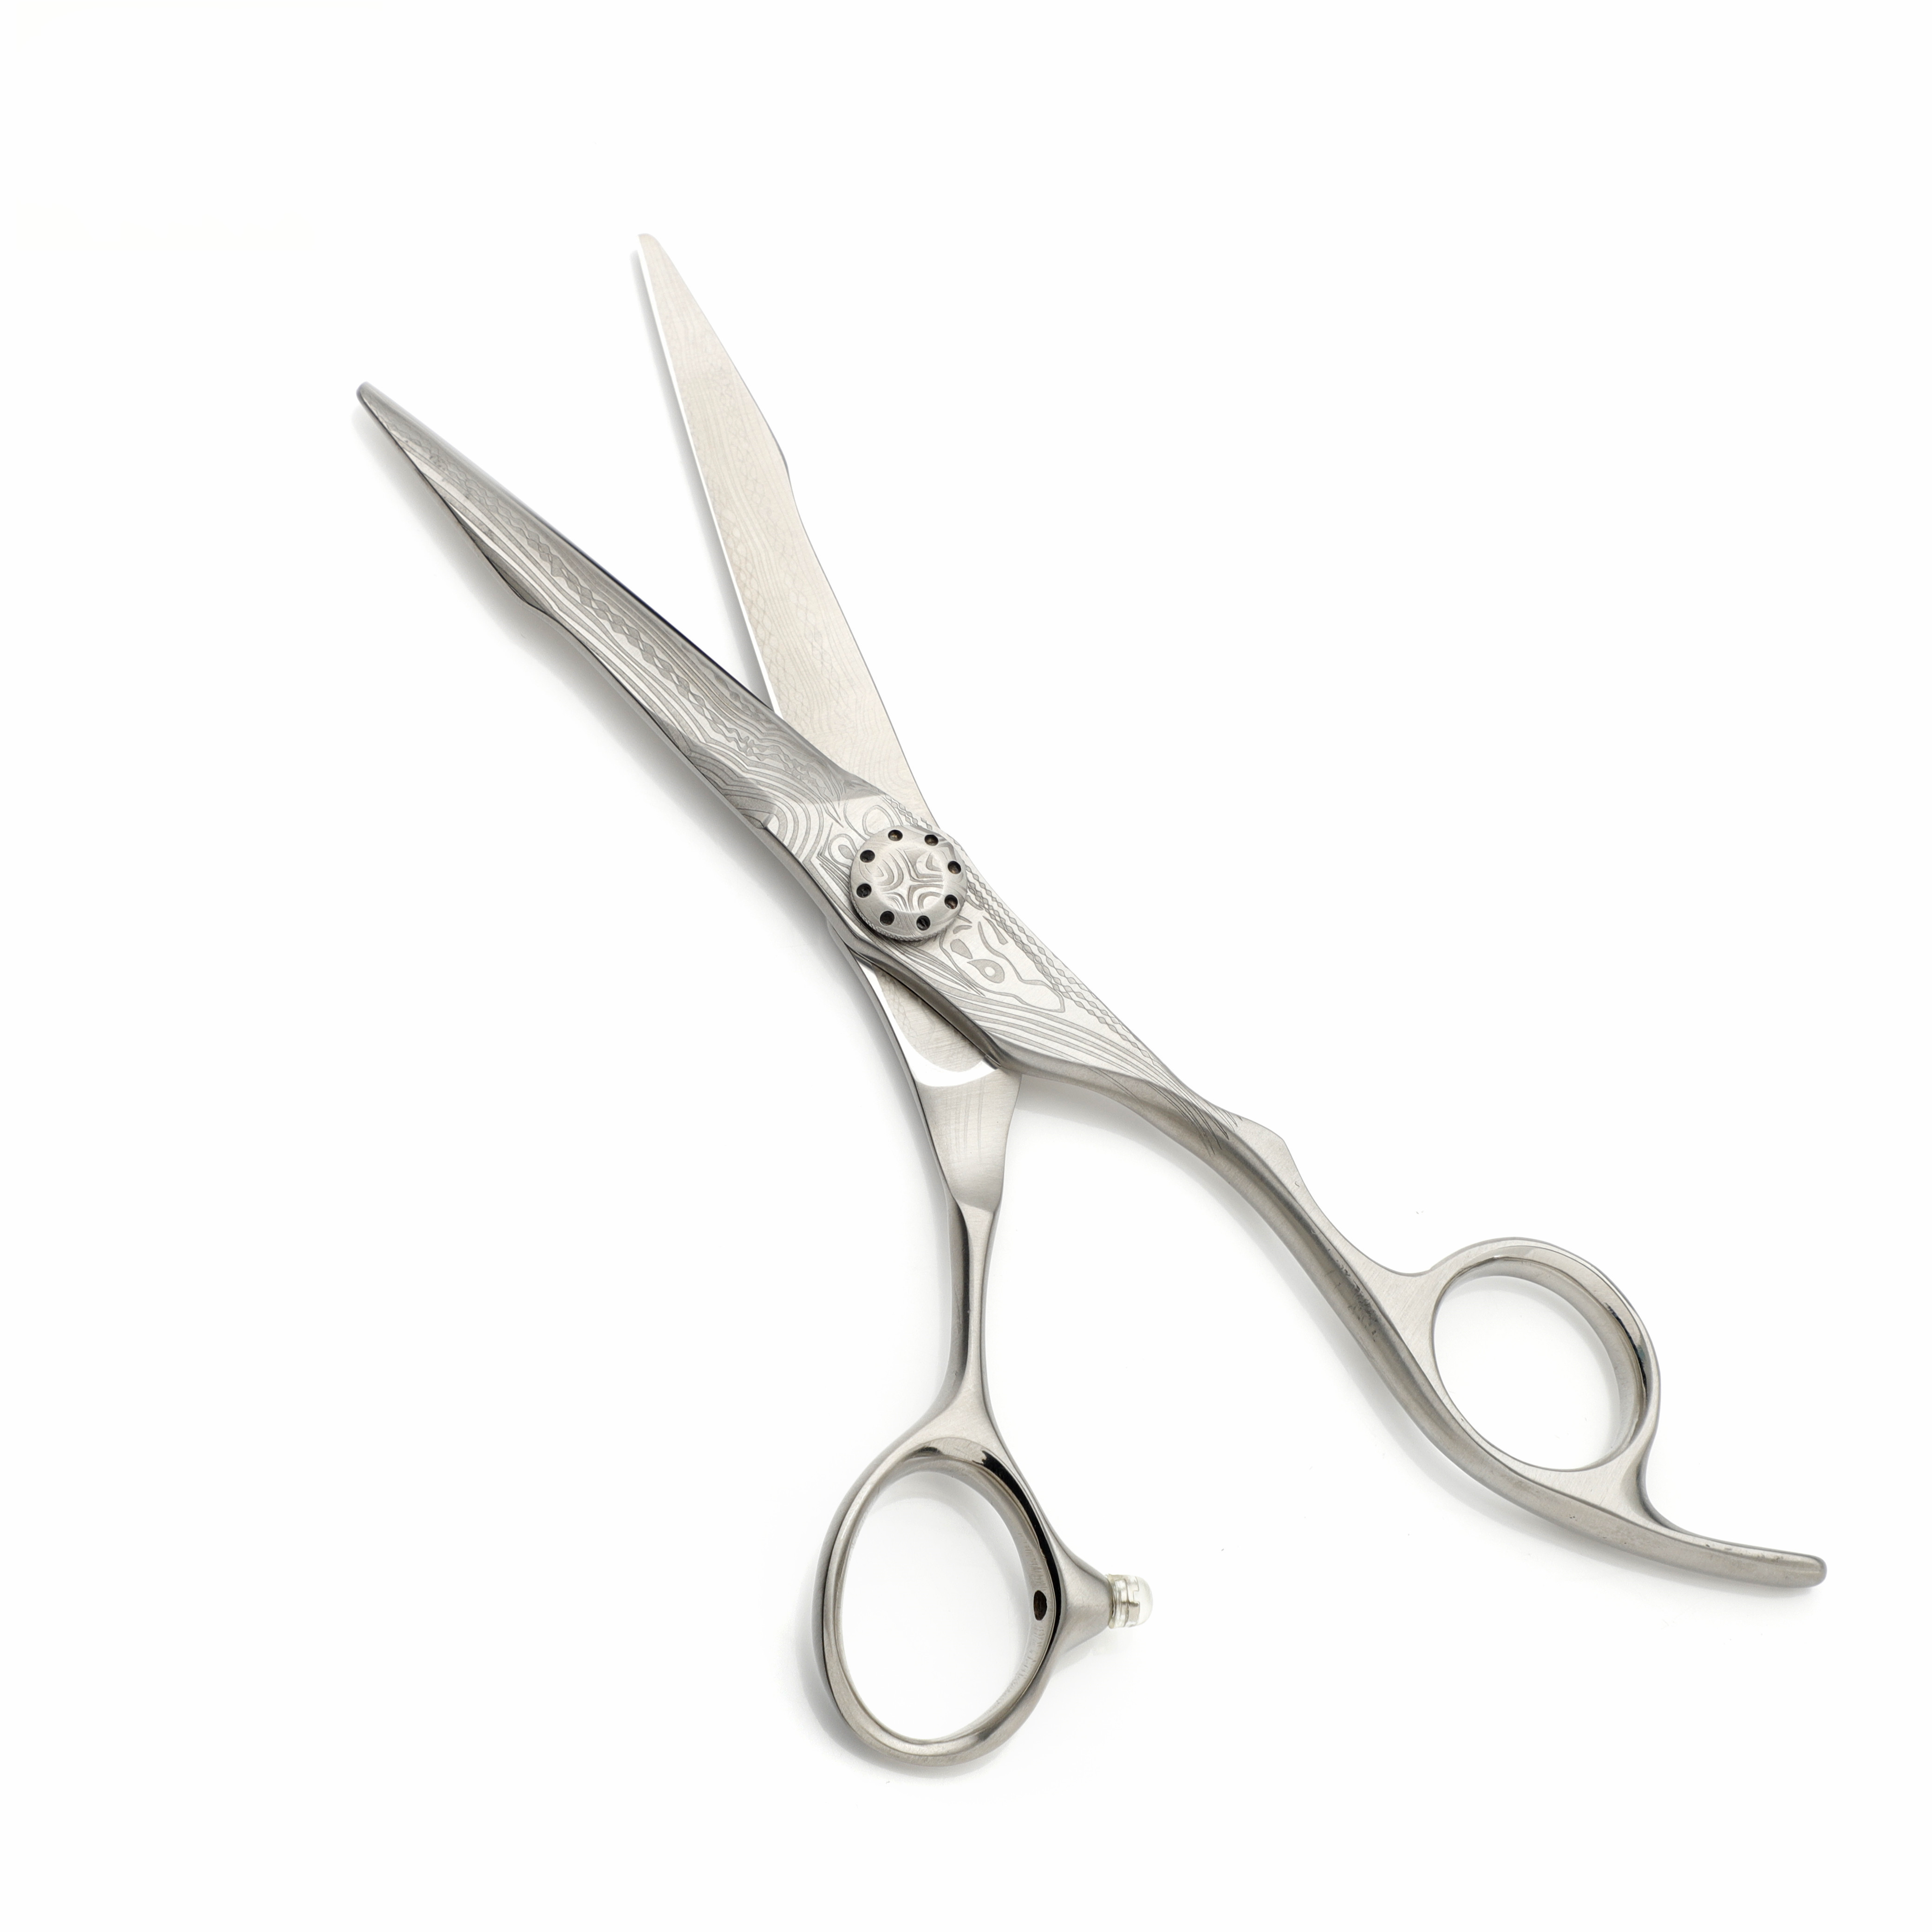 The main factors for the poor feel of hairdressing scissors.